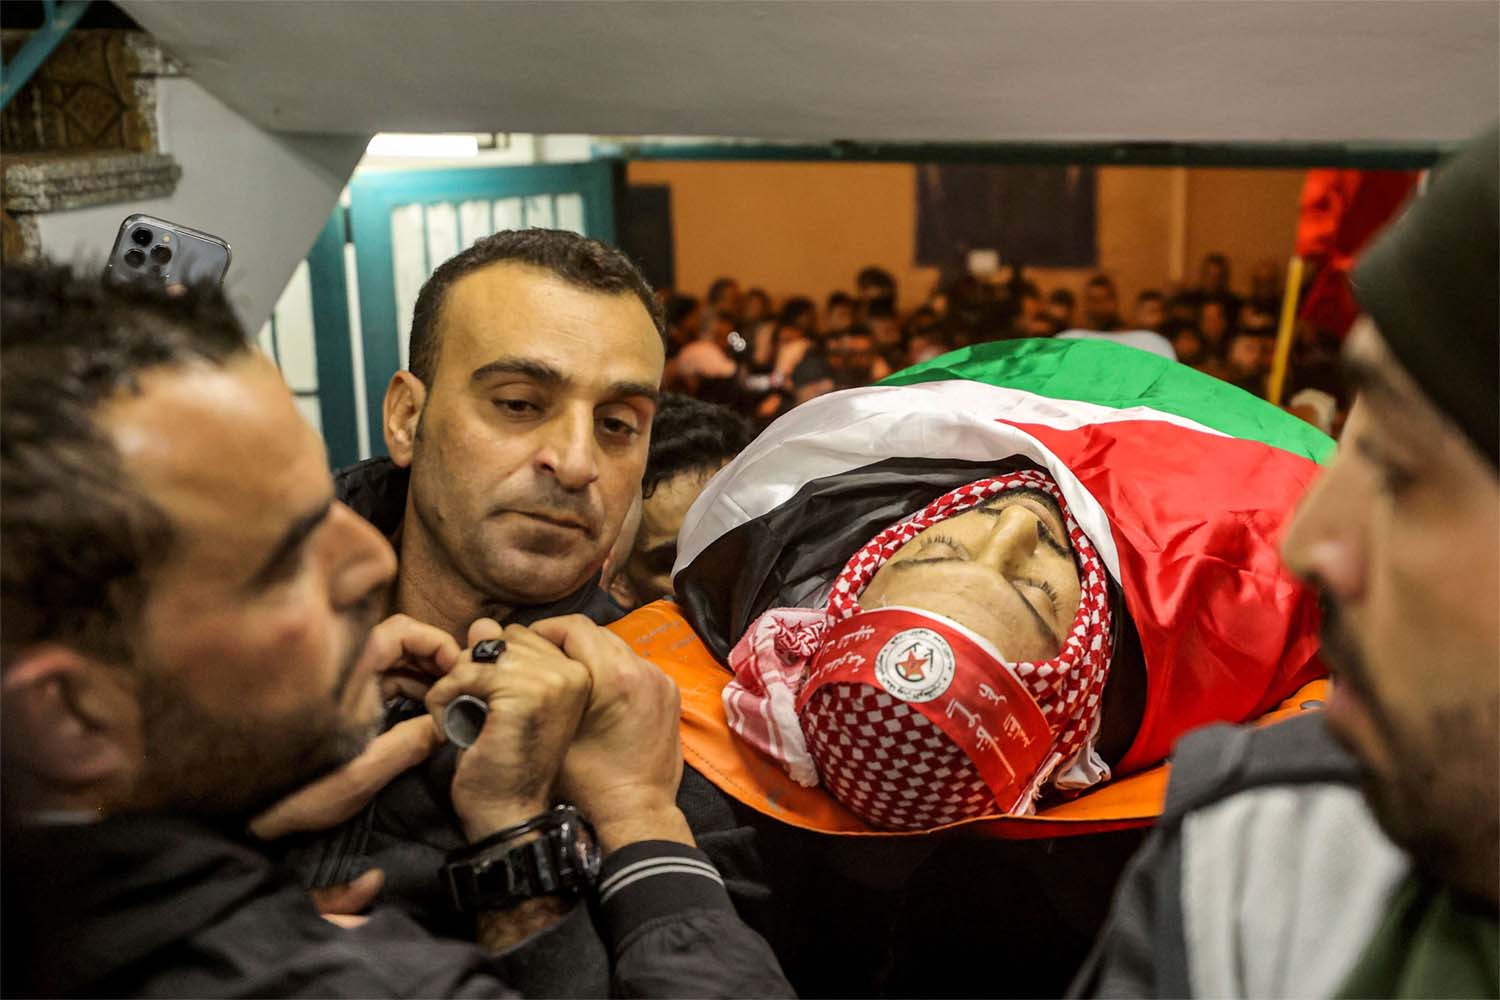 More than 130 Palestinians have been killed by Israel this year, making 2022 the deadliest since 2006